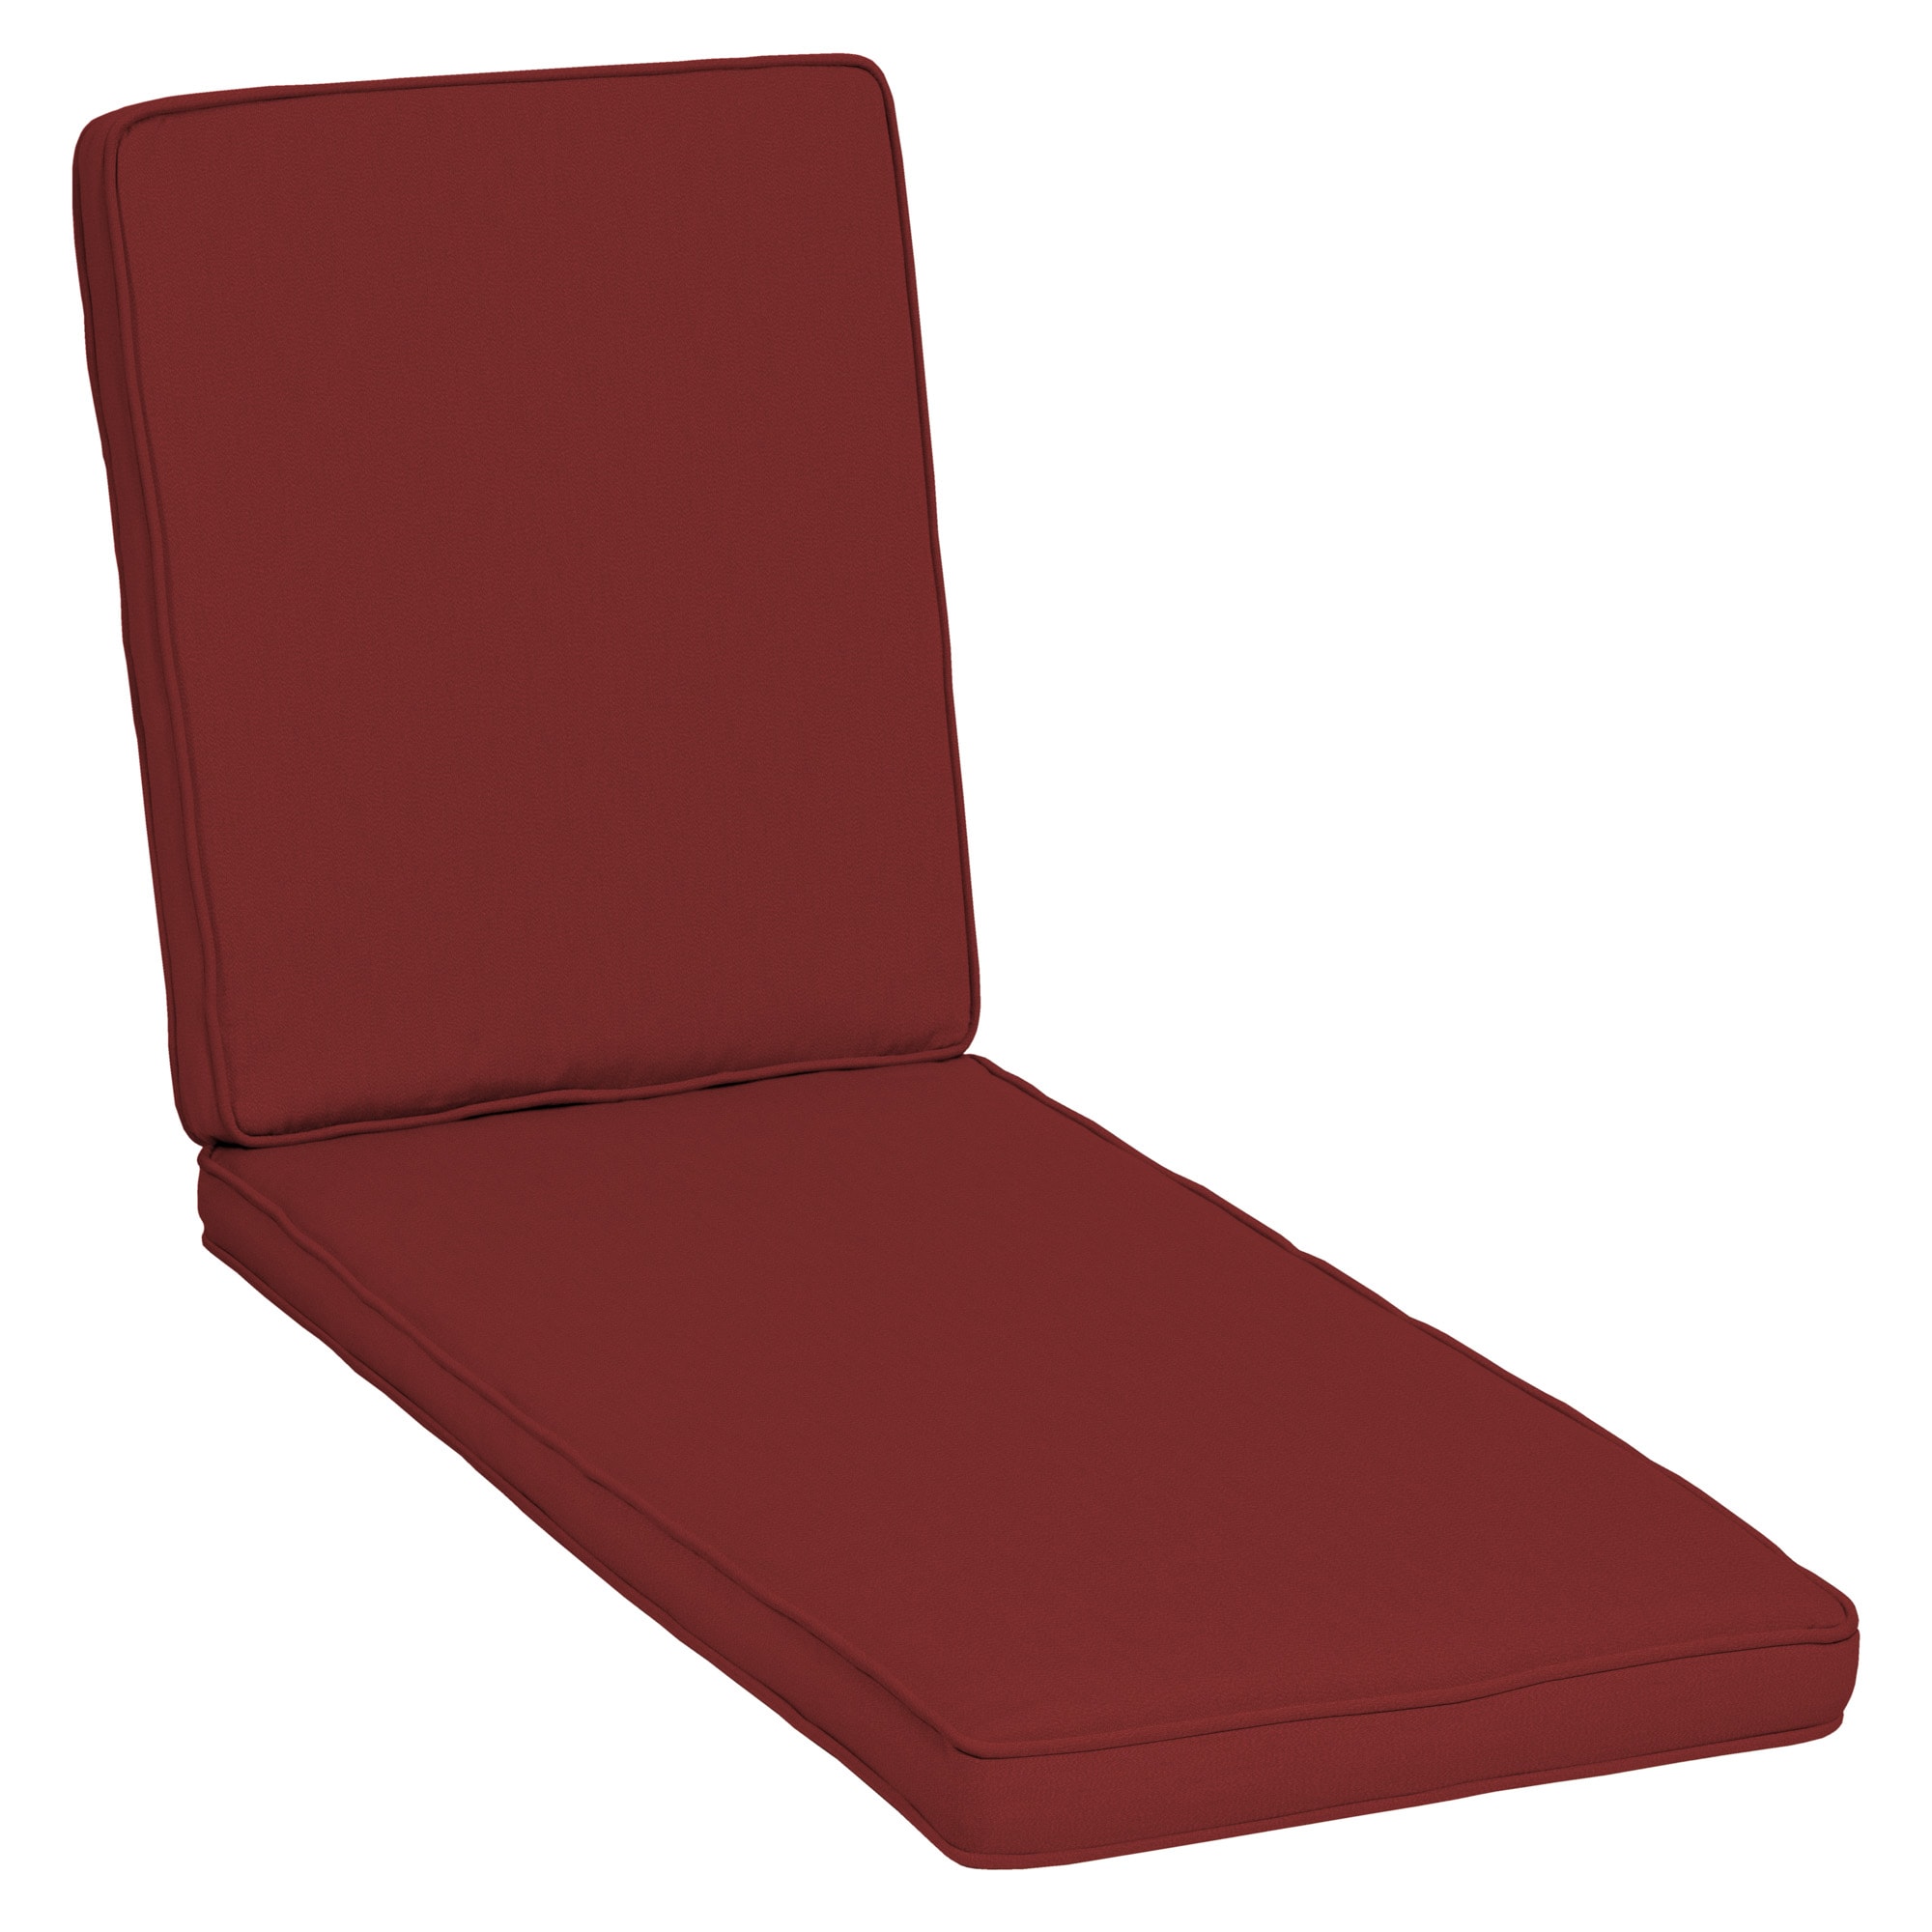 Arden Selections Oasis 19 x 19 in. Outdoor Seat Cushion - Classic Red, Size: 19 inch x 19 inch